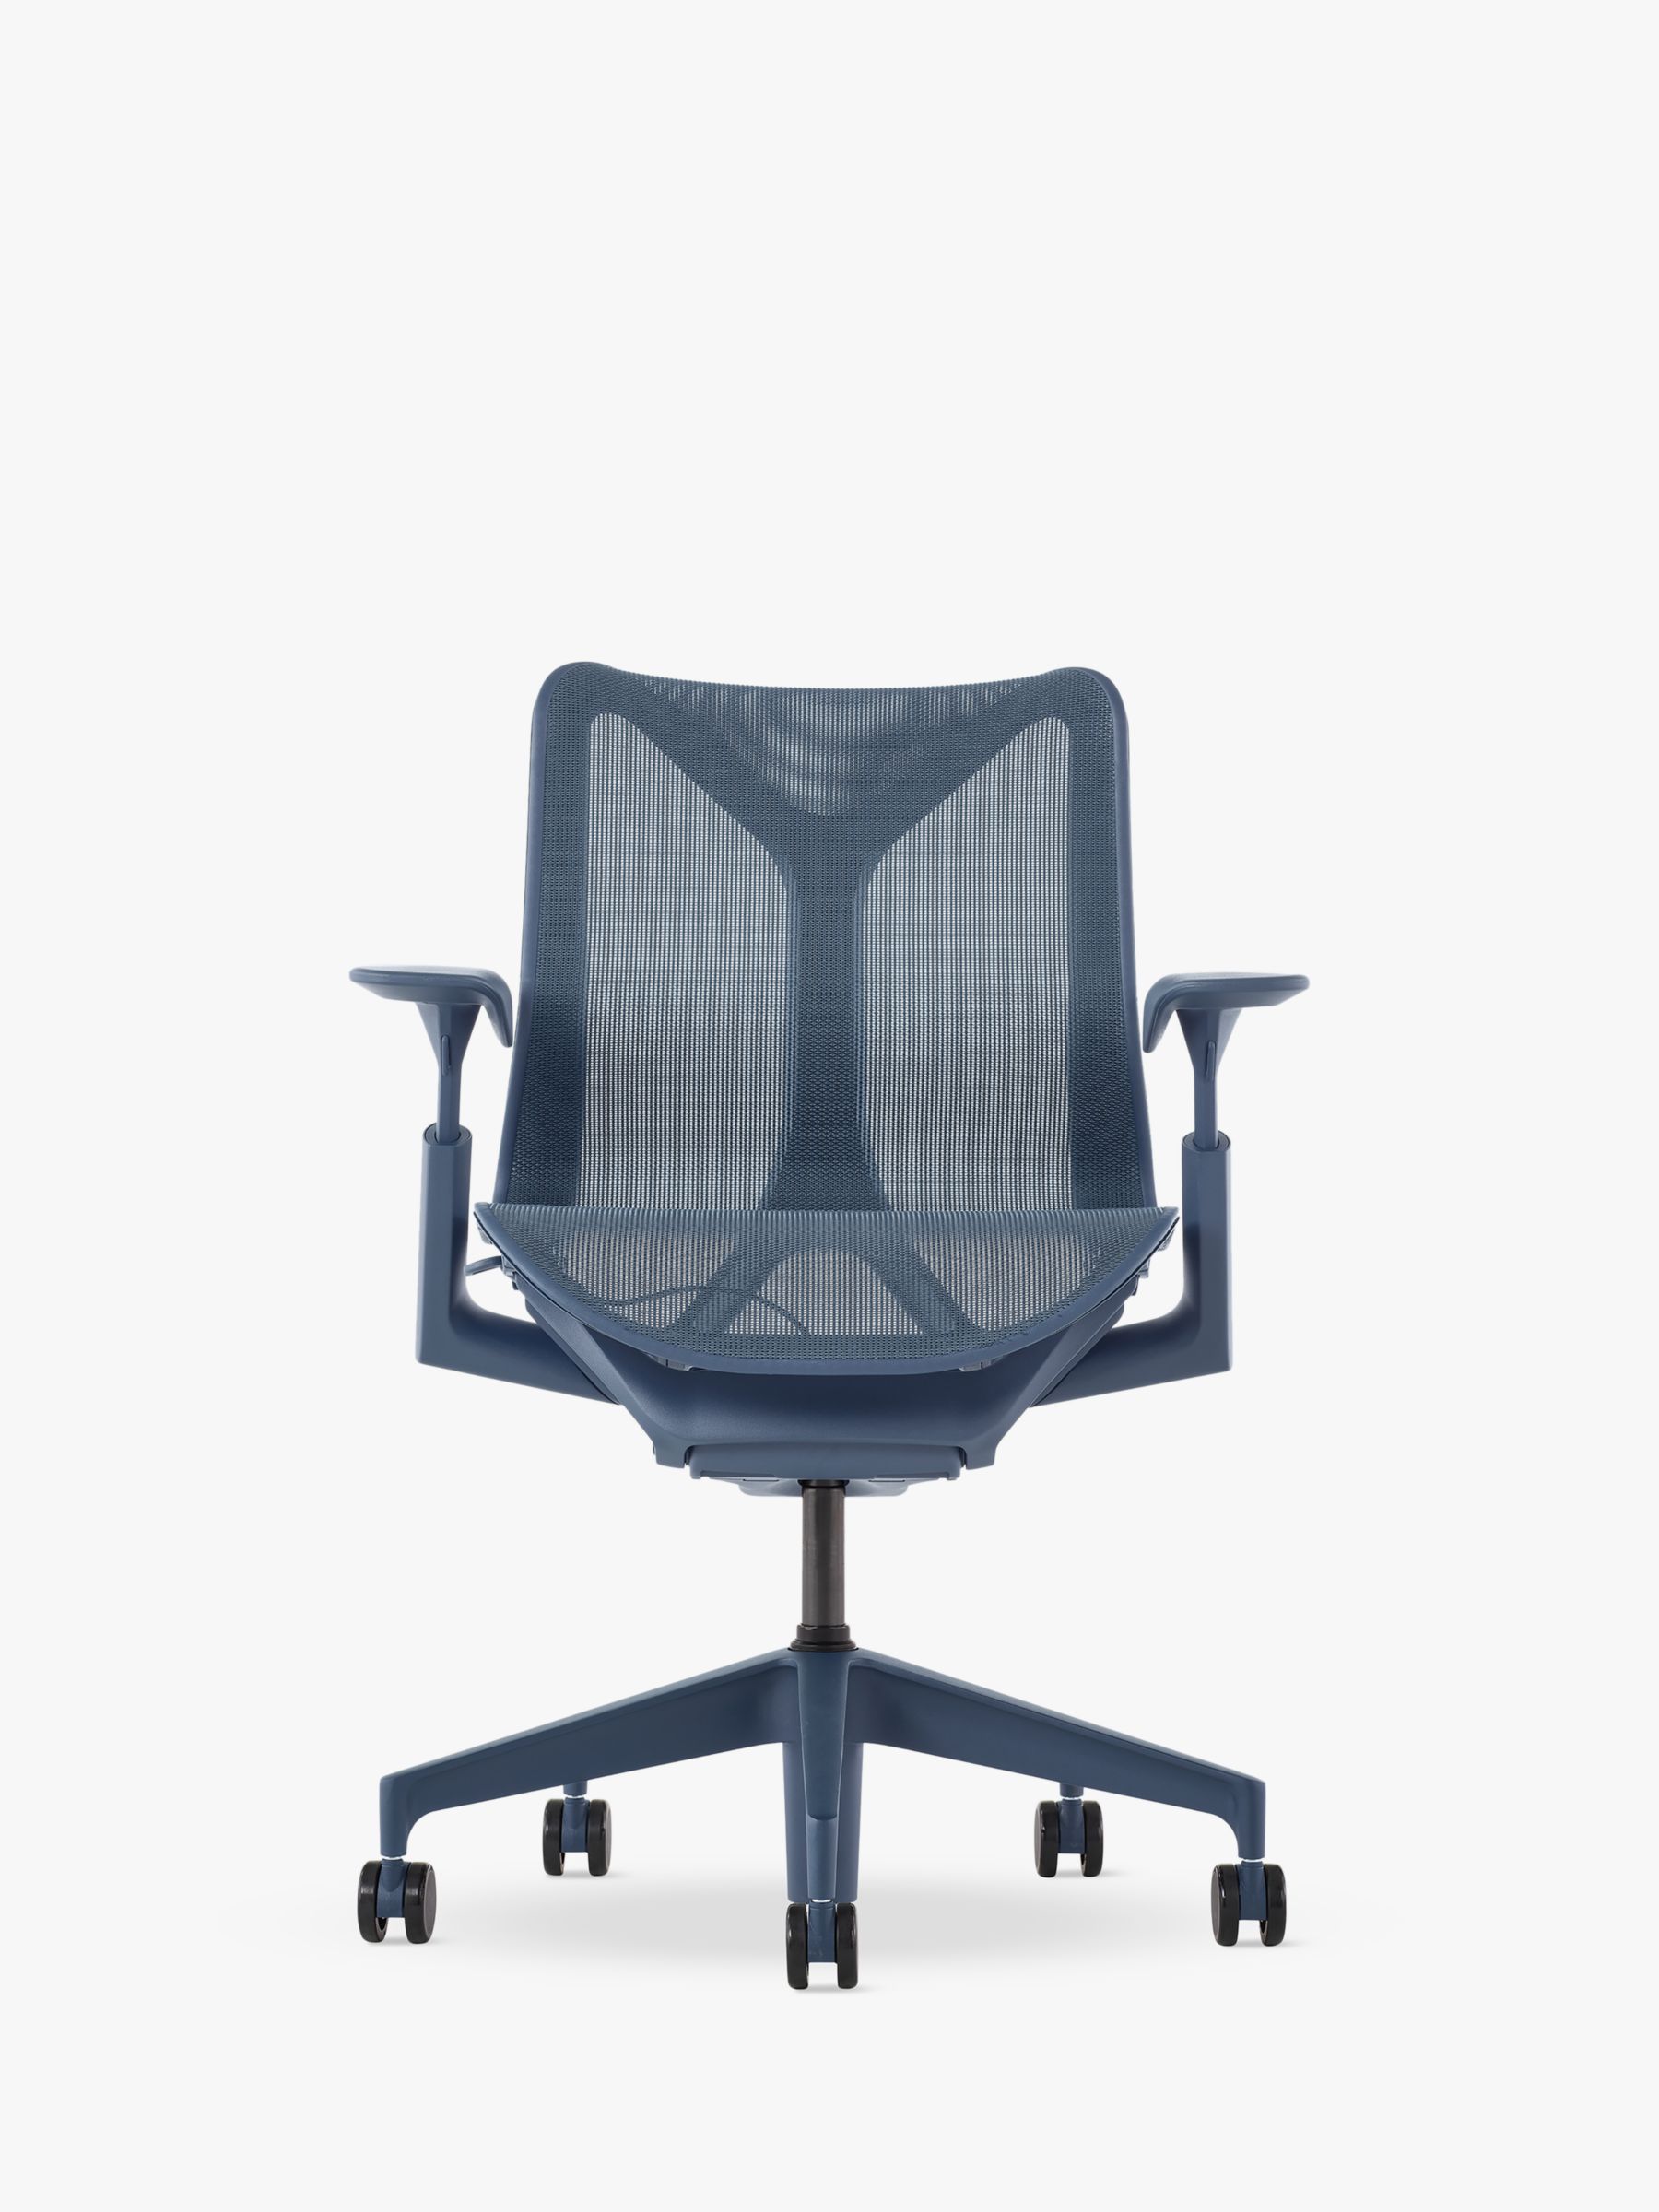 Photo of Herman miller cosm low back office chair